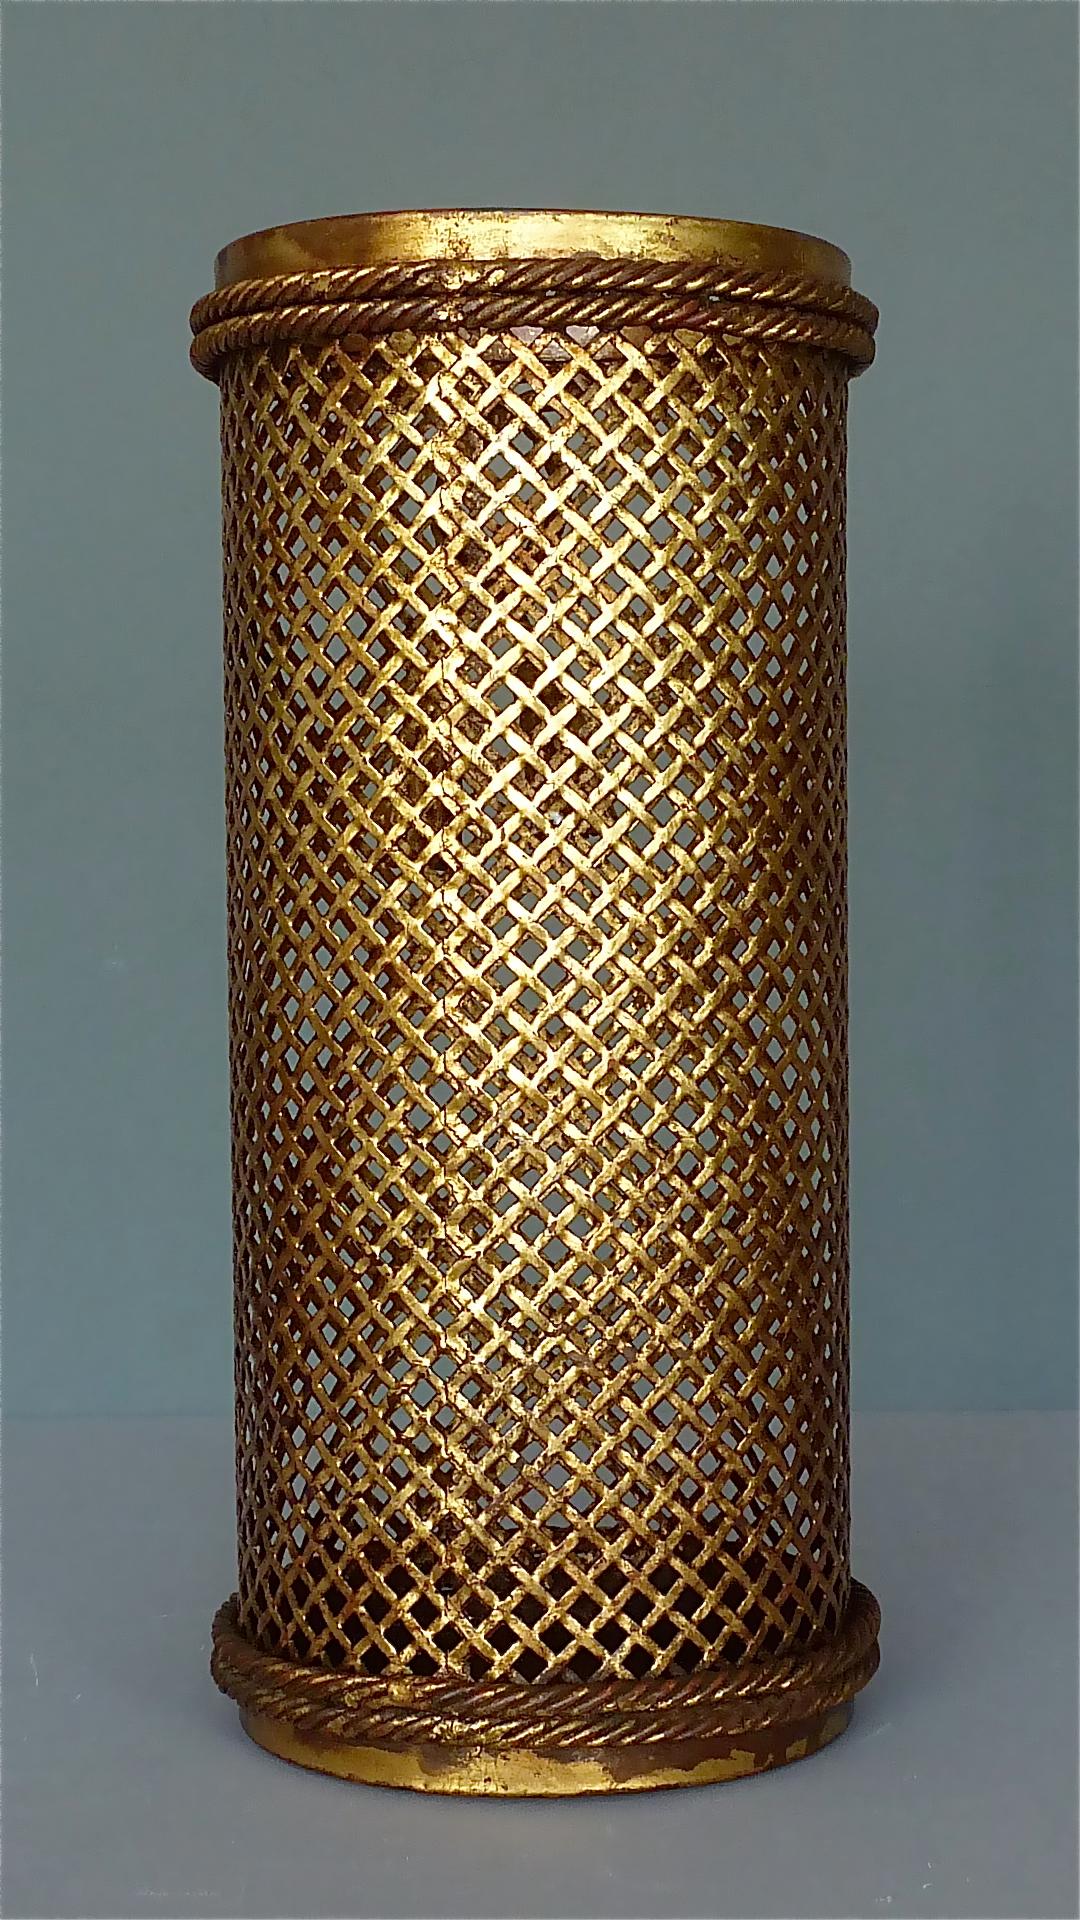 Early Italian Midcentury Umbrella Stand Basket Gilt Woven Metal Hans Kögl, 1950s For Sale 6